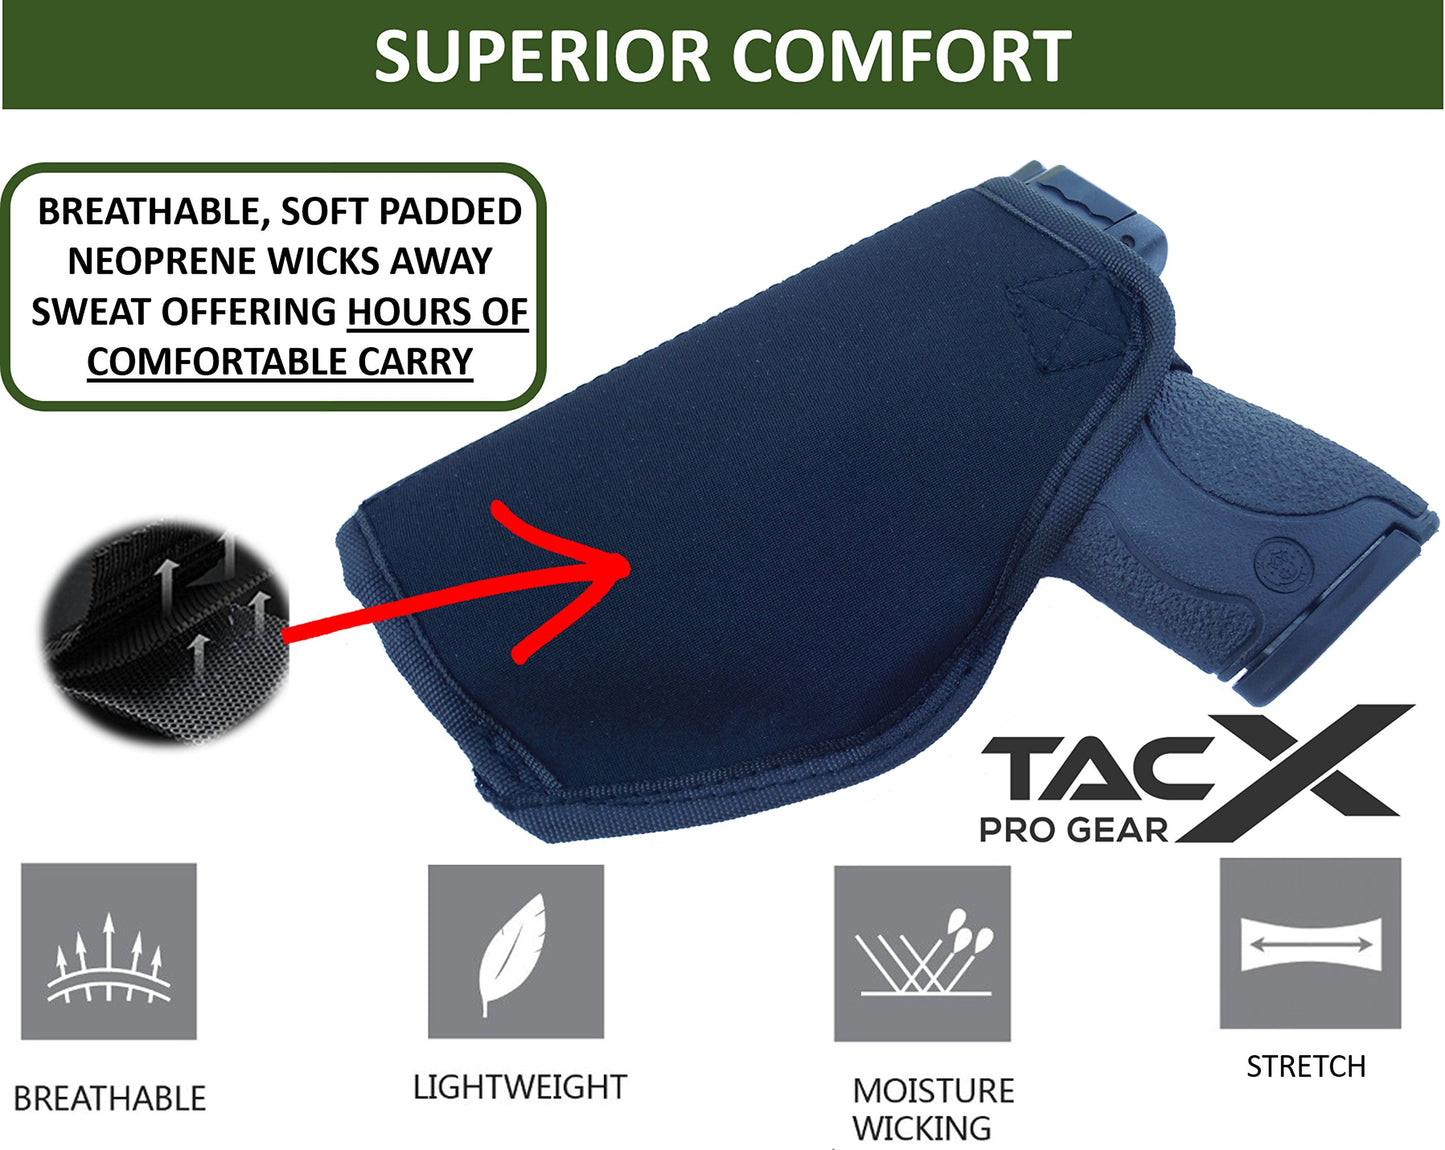 TacX Pro Gear Universal IWB Holster | Concealed Carry | Inside The Waistband Bundle | Flexible, Breathable, Neoprene | S&W M&P Shield 9/40 1911 XDS Taurus Glock (Left + Right) - Opticdeals